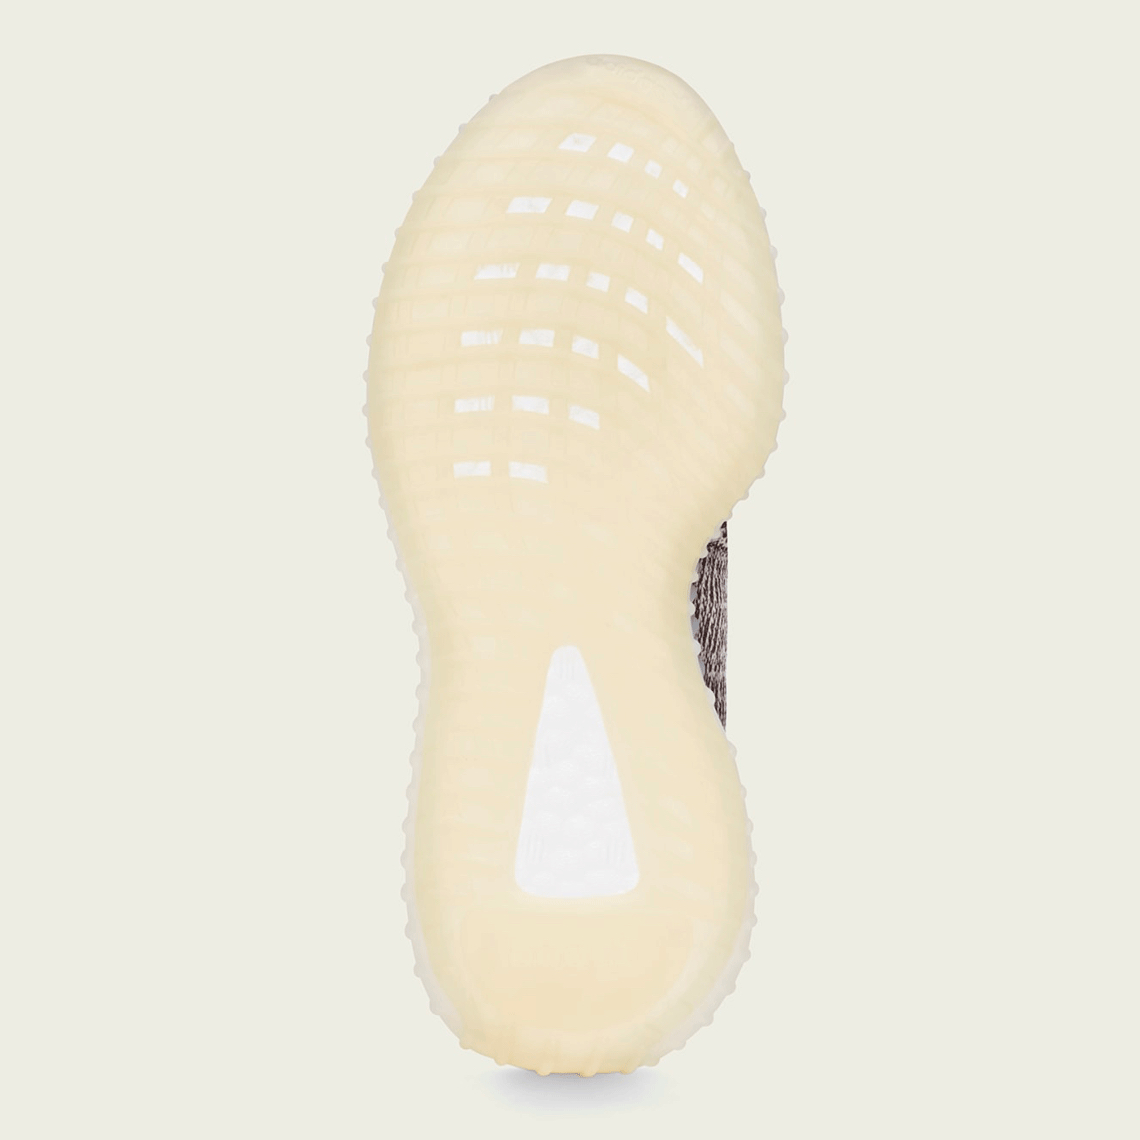 Yeezy 350 V2 Zyon – Outofstock Store